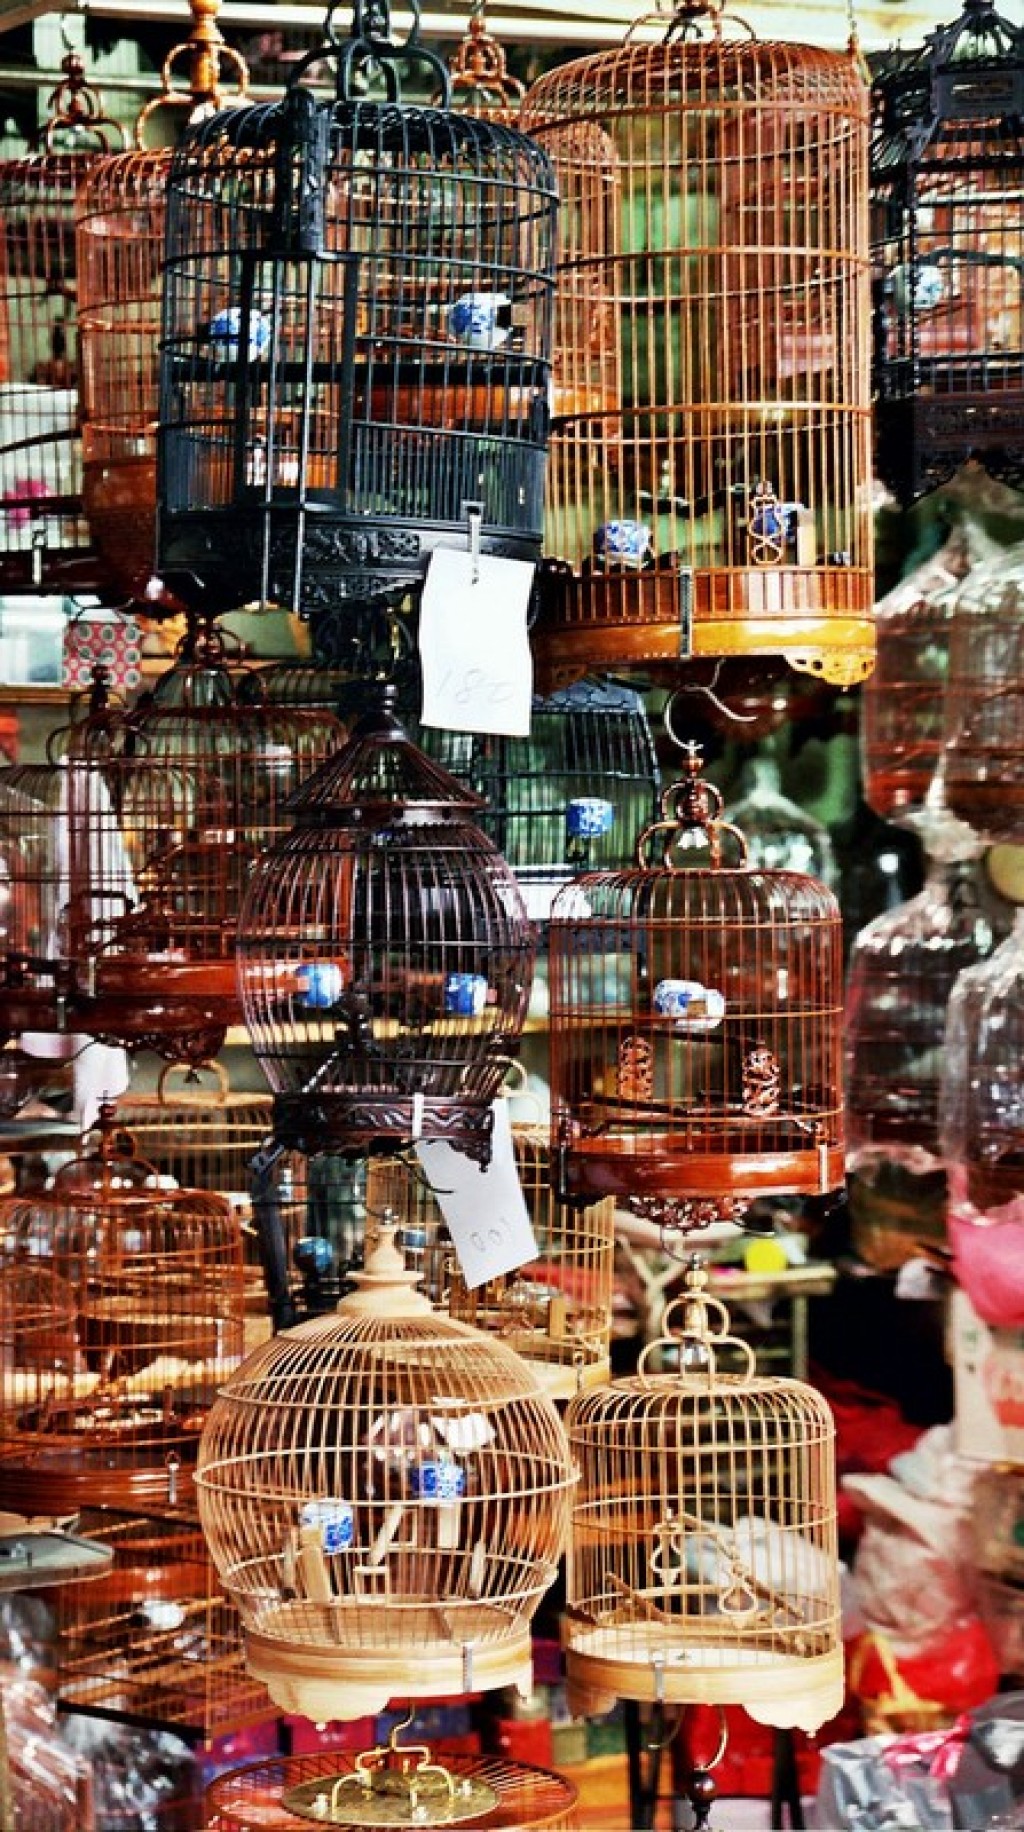 We bought a birdcage, and mailed it home from the fabulously well-organized main post office.   